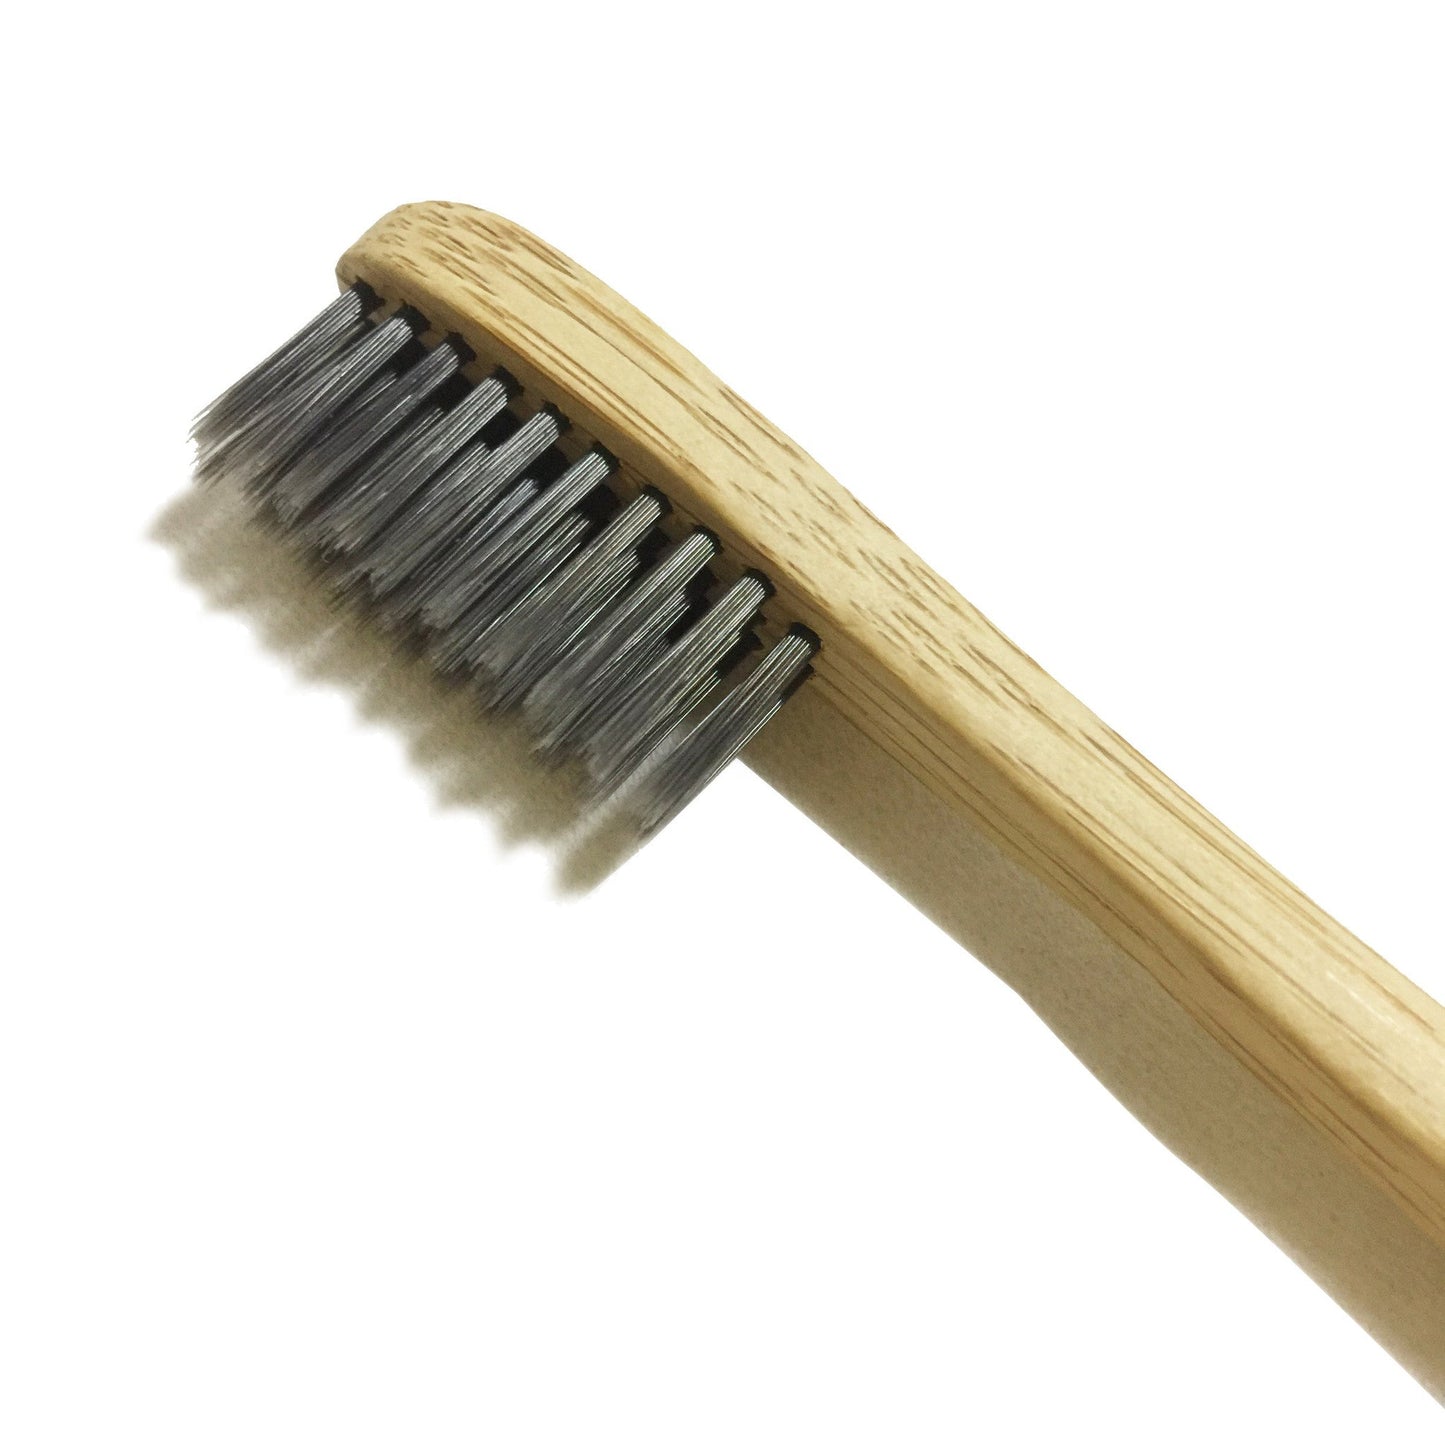 3x Bamboo Toothbrush with Charcoal Fibre Bristles - SWOP - shop without plastic